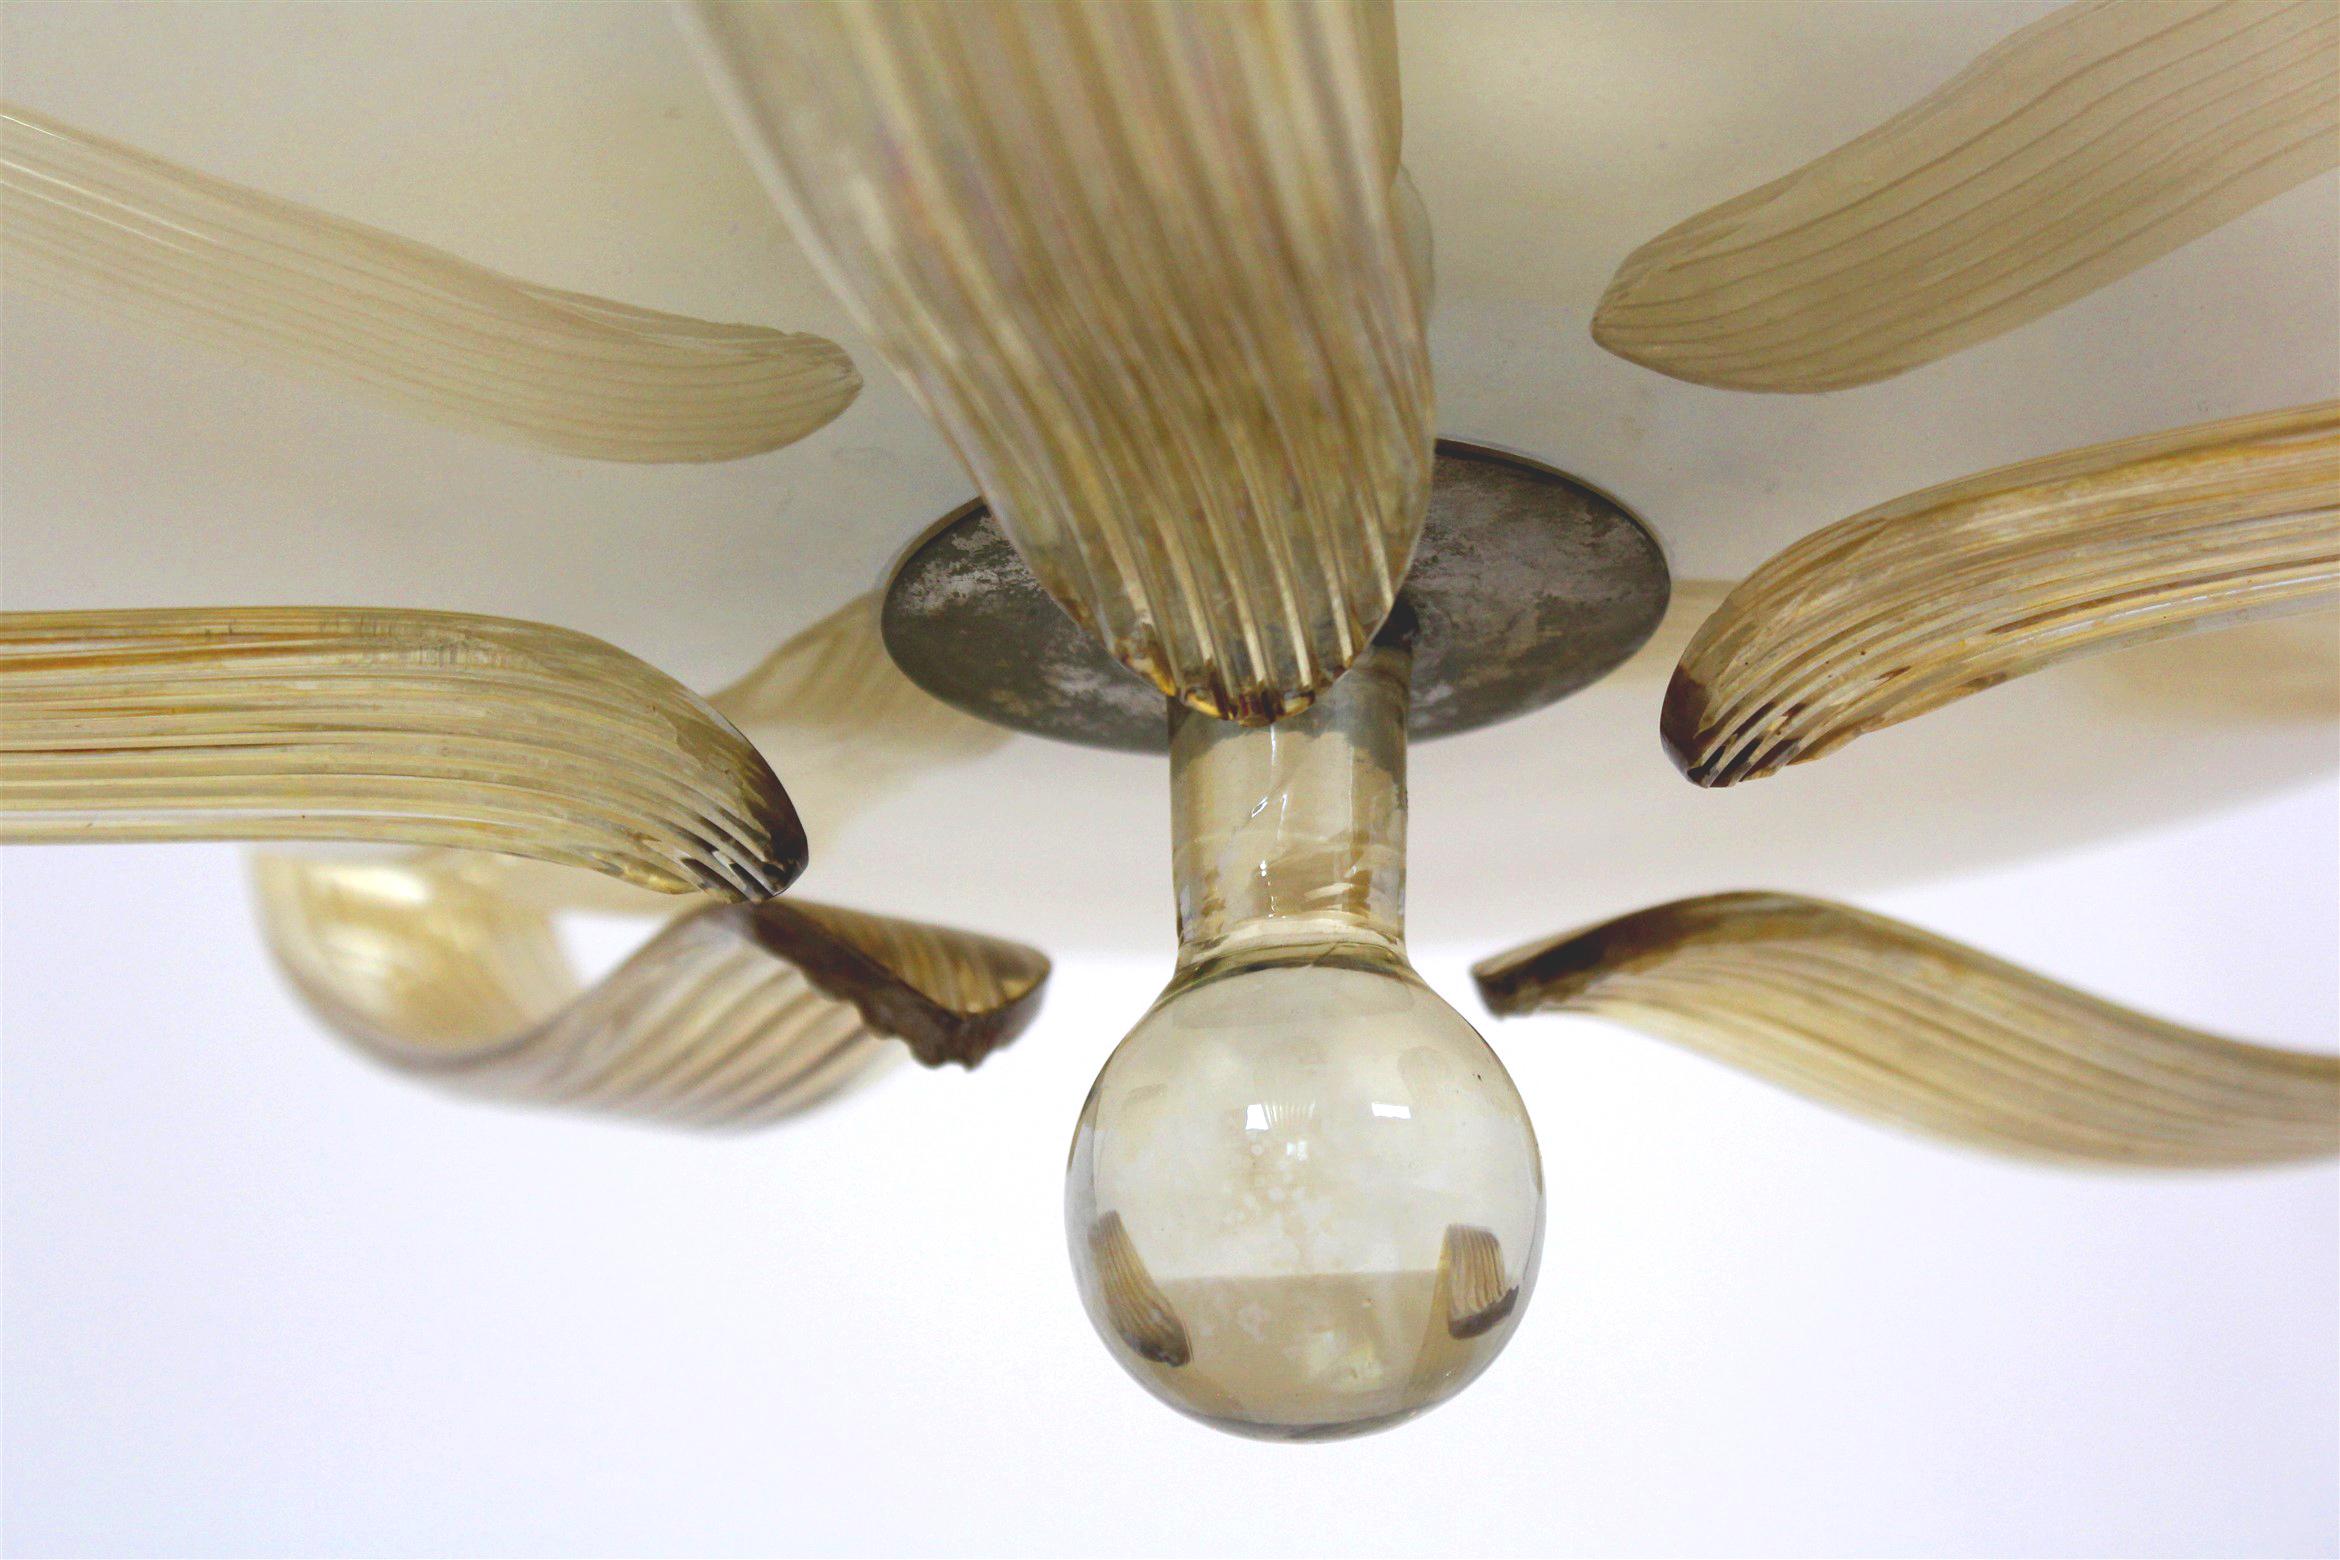 
This Art Deco style chandelier was manufactured by ESC in the 1940s.
Made of brass and curved glass, kept in original, good condition.